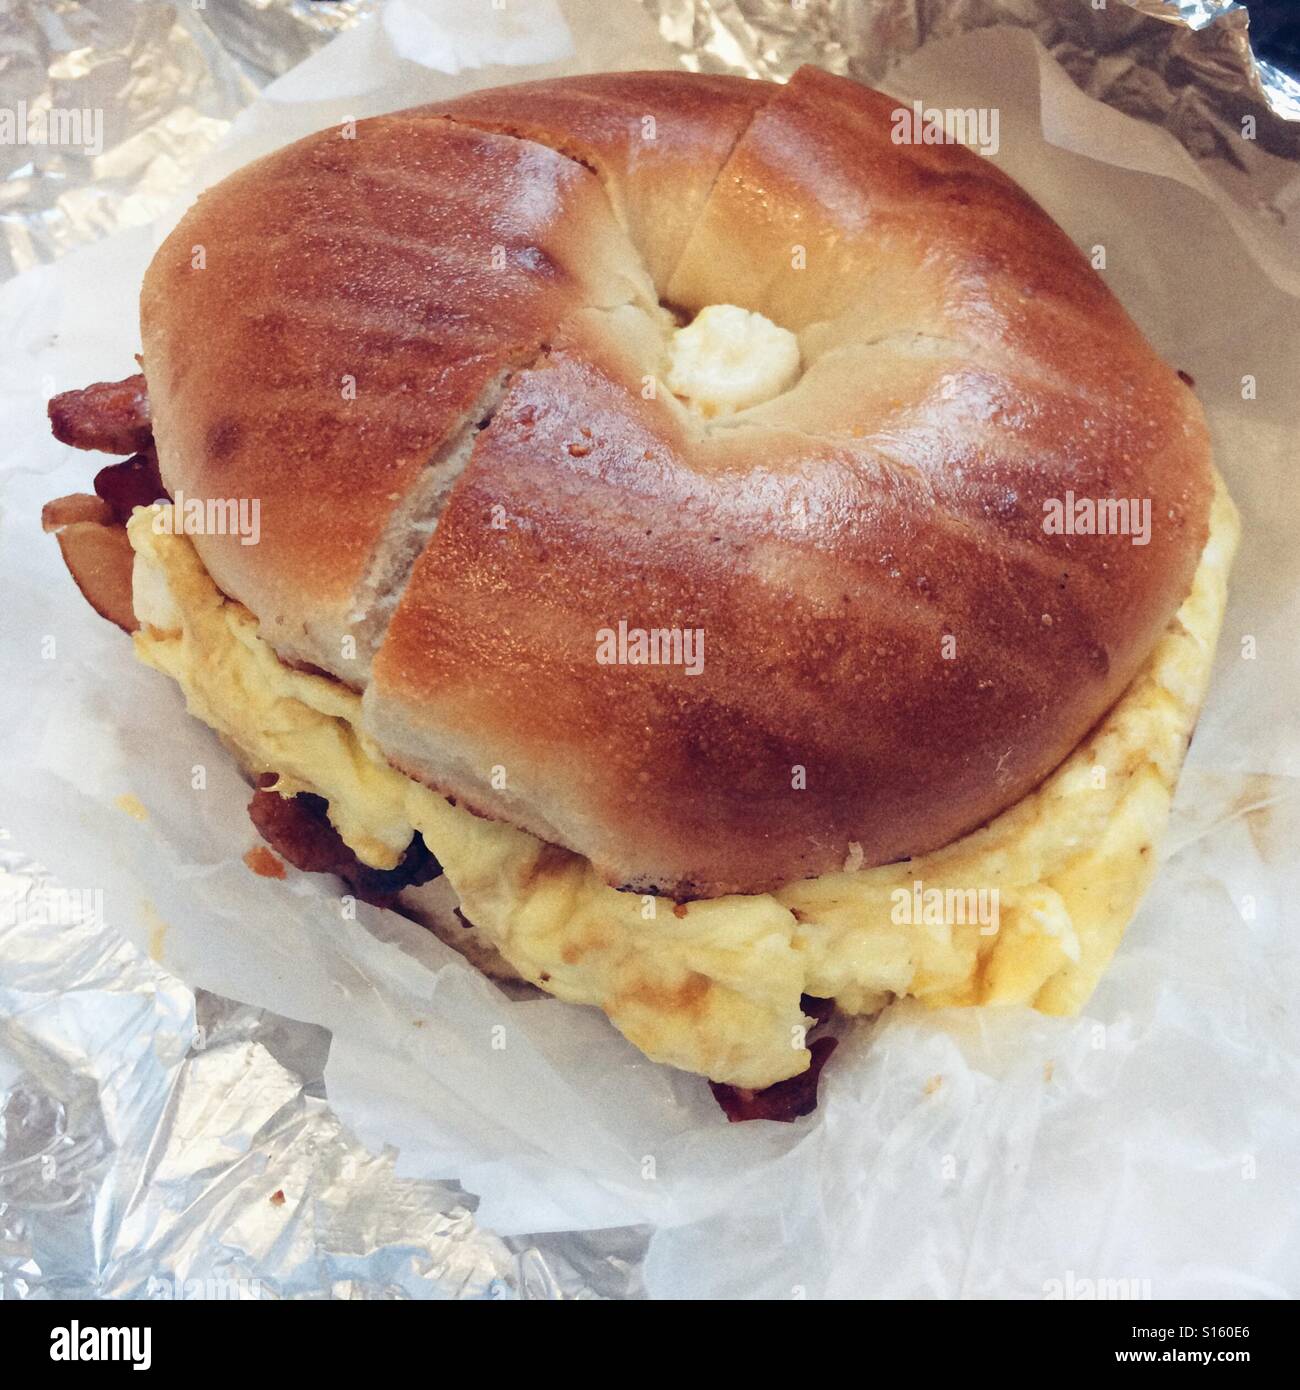 New York bacon egg and cheese toasted bagel. New York, United States of America. Stock Photo